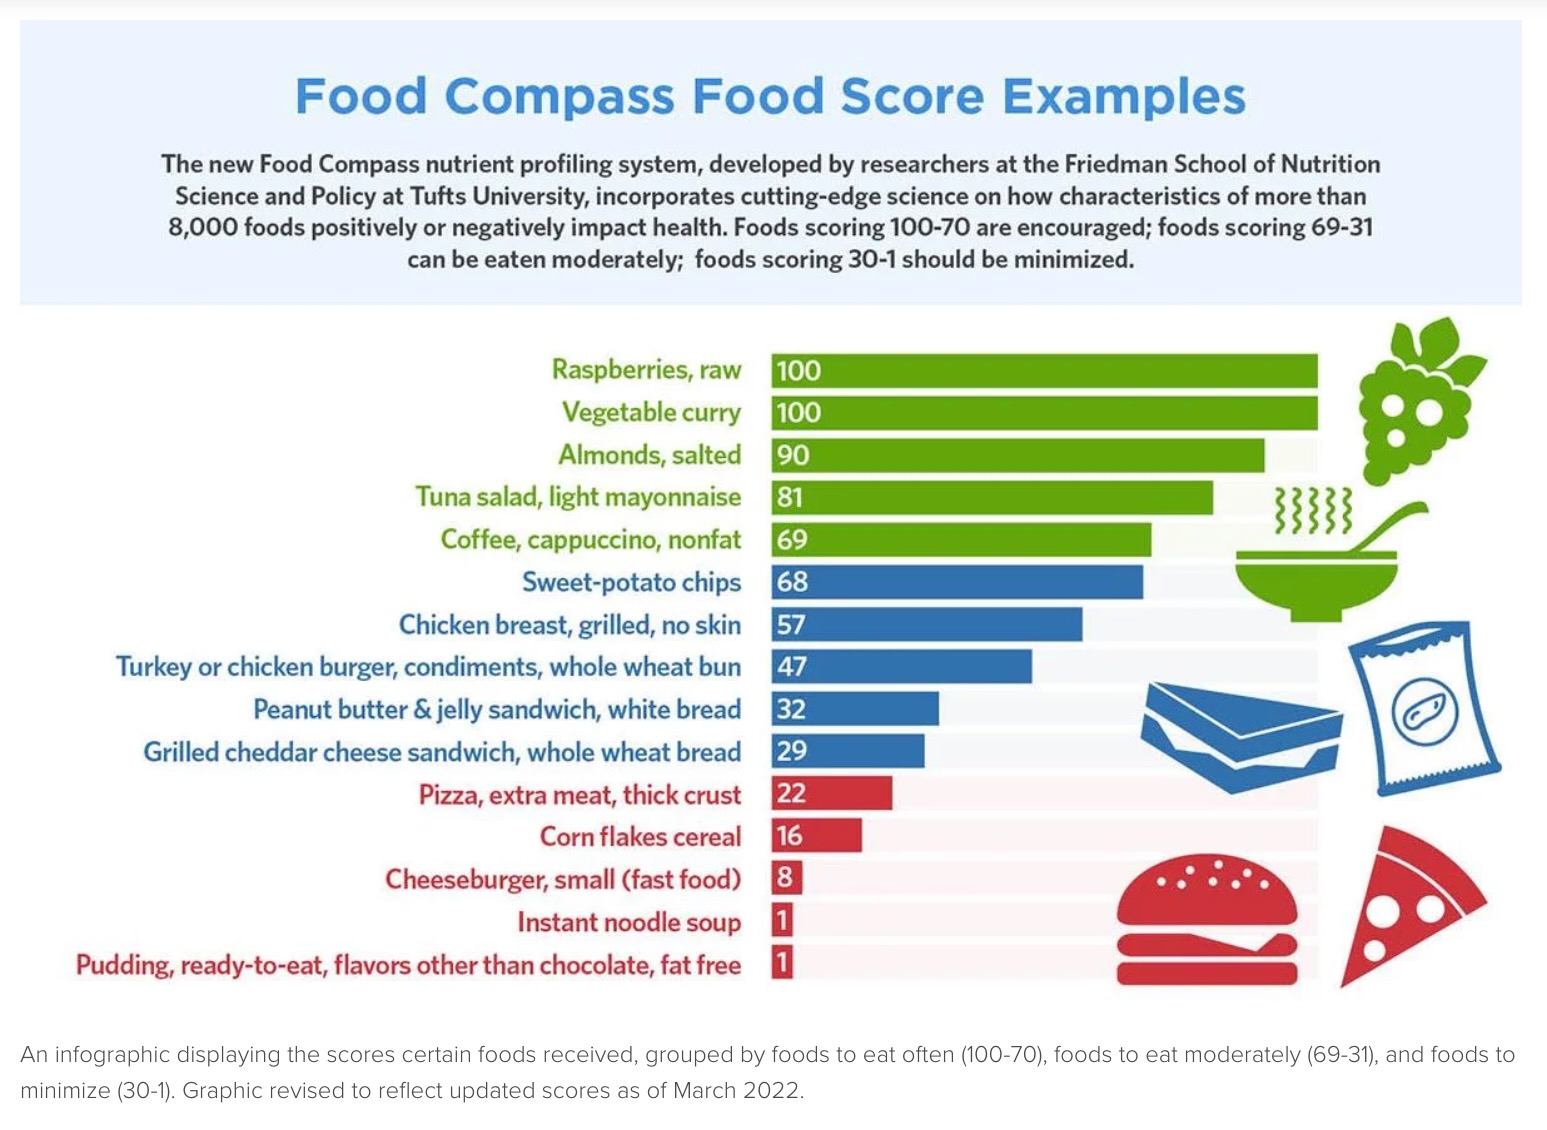 Food compass food score examples, rating foods from encouraged in green (fruit, nuts, tuna) to moderate in blue (grilled chicken breast, turkey burger, grilled cheese) to minimize in red (thick crust pizza, fast food burgers, Corn Flakes)